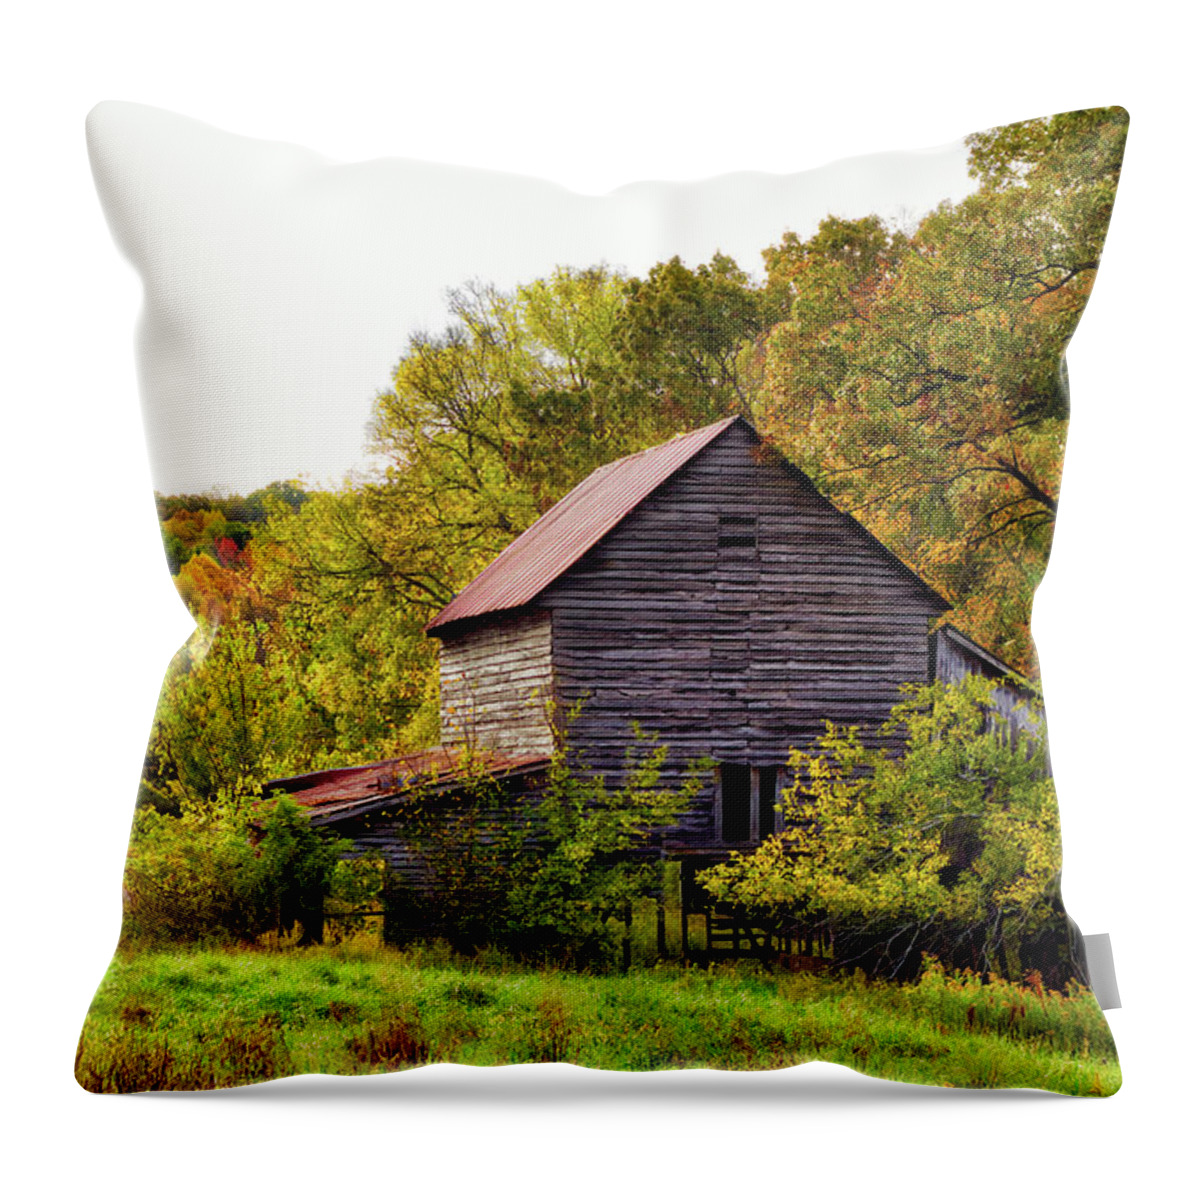 Landscape Throw Pillow featuring the photograph Overgrown by Amber Kresge